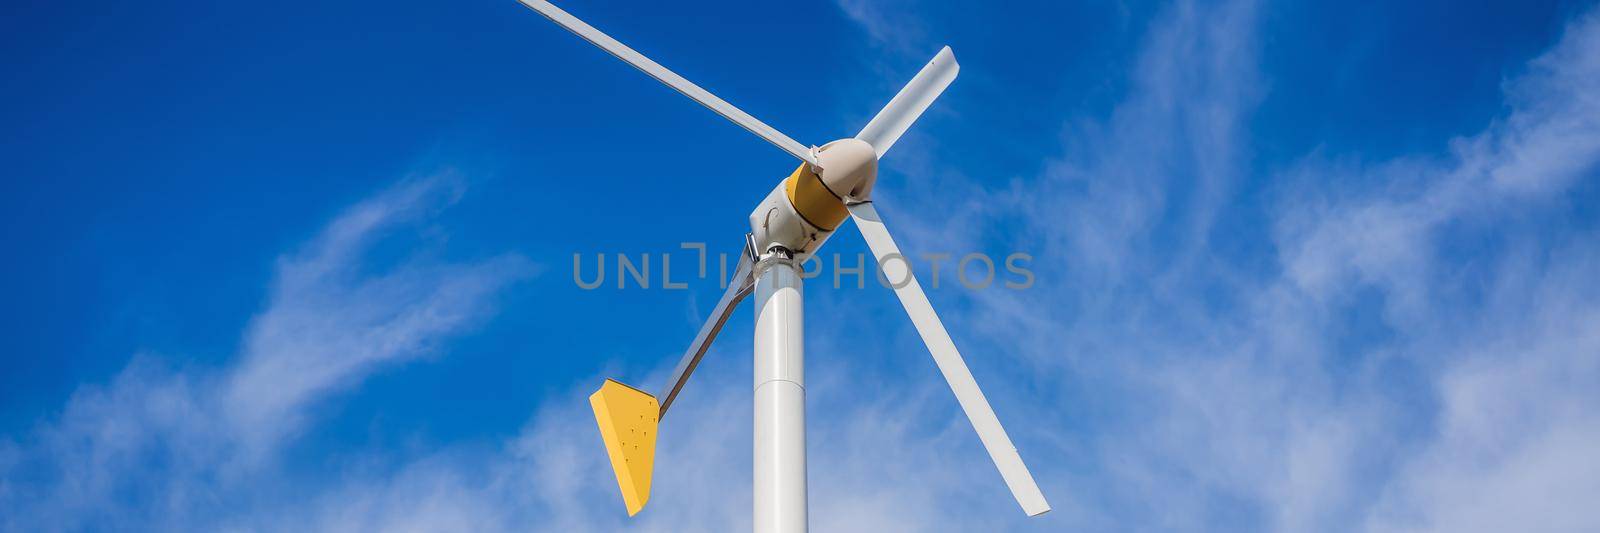 Wind turbines generating electricity with blue sky - energy conservation concept. BANNER, LONG FORMAT